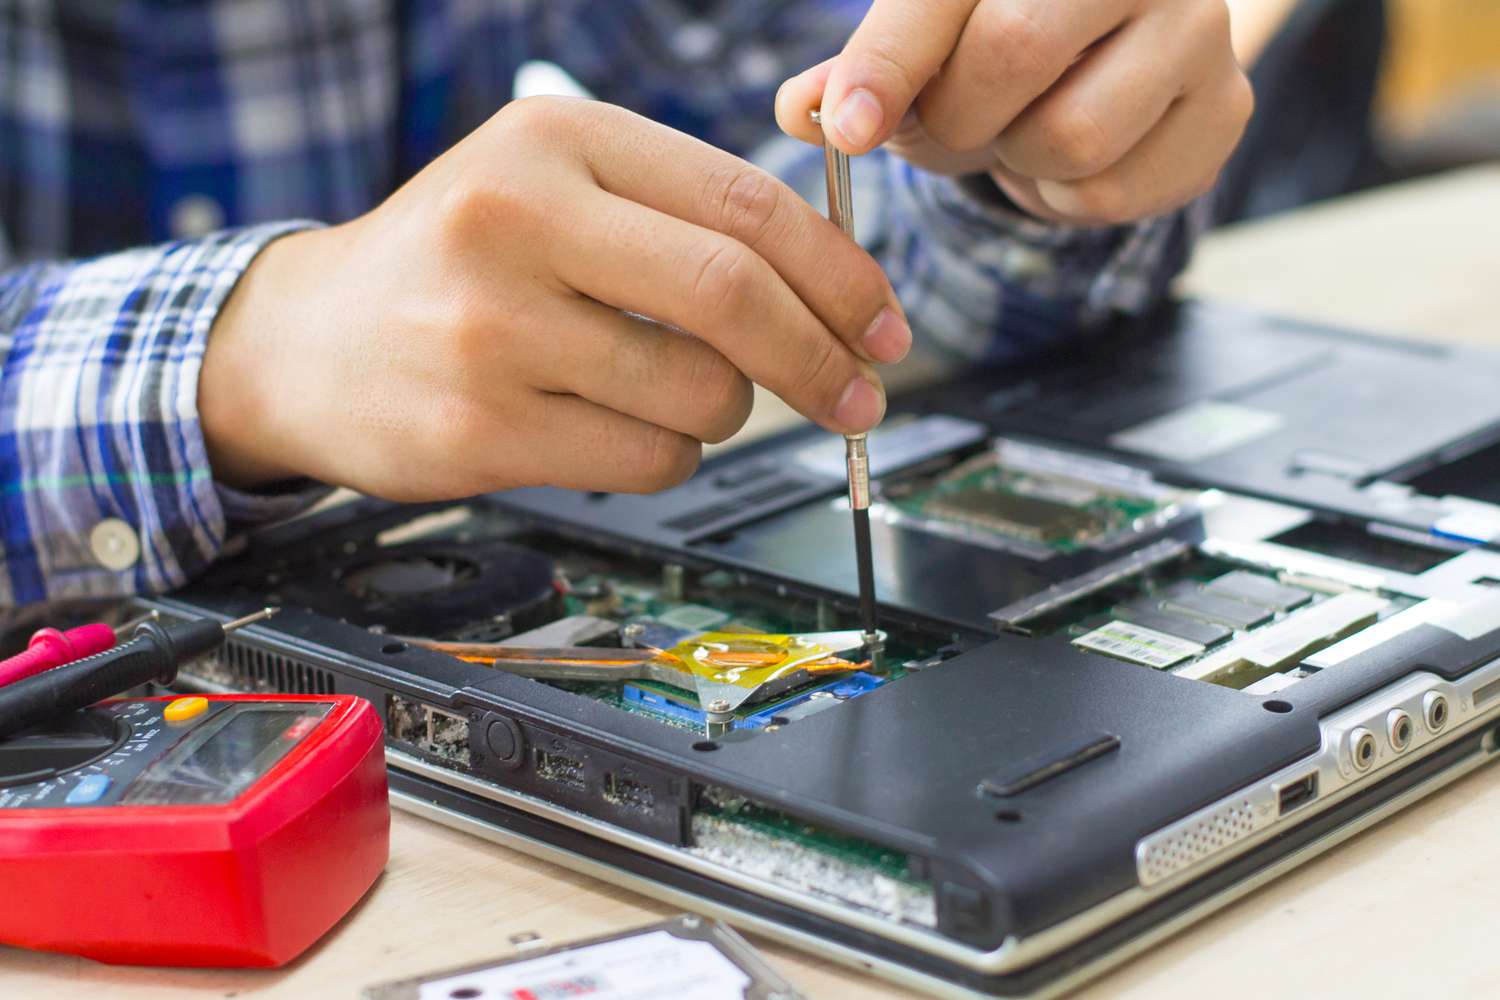 Laptop and PC repair at SunX Technologies.